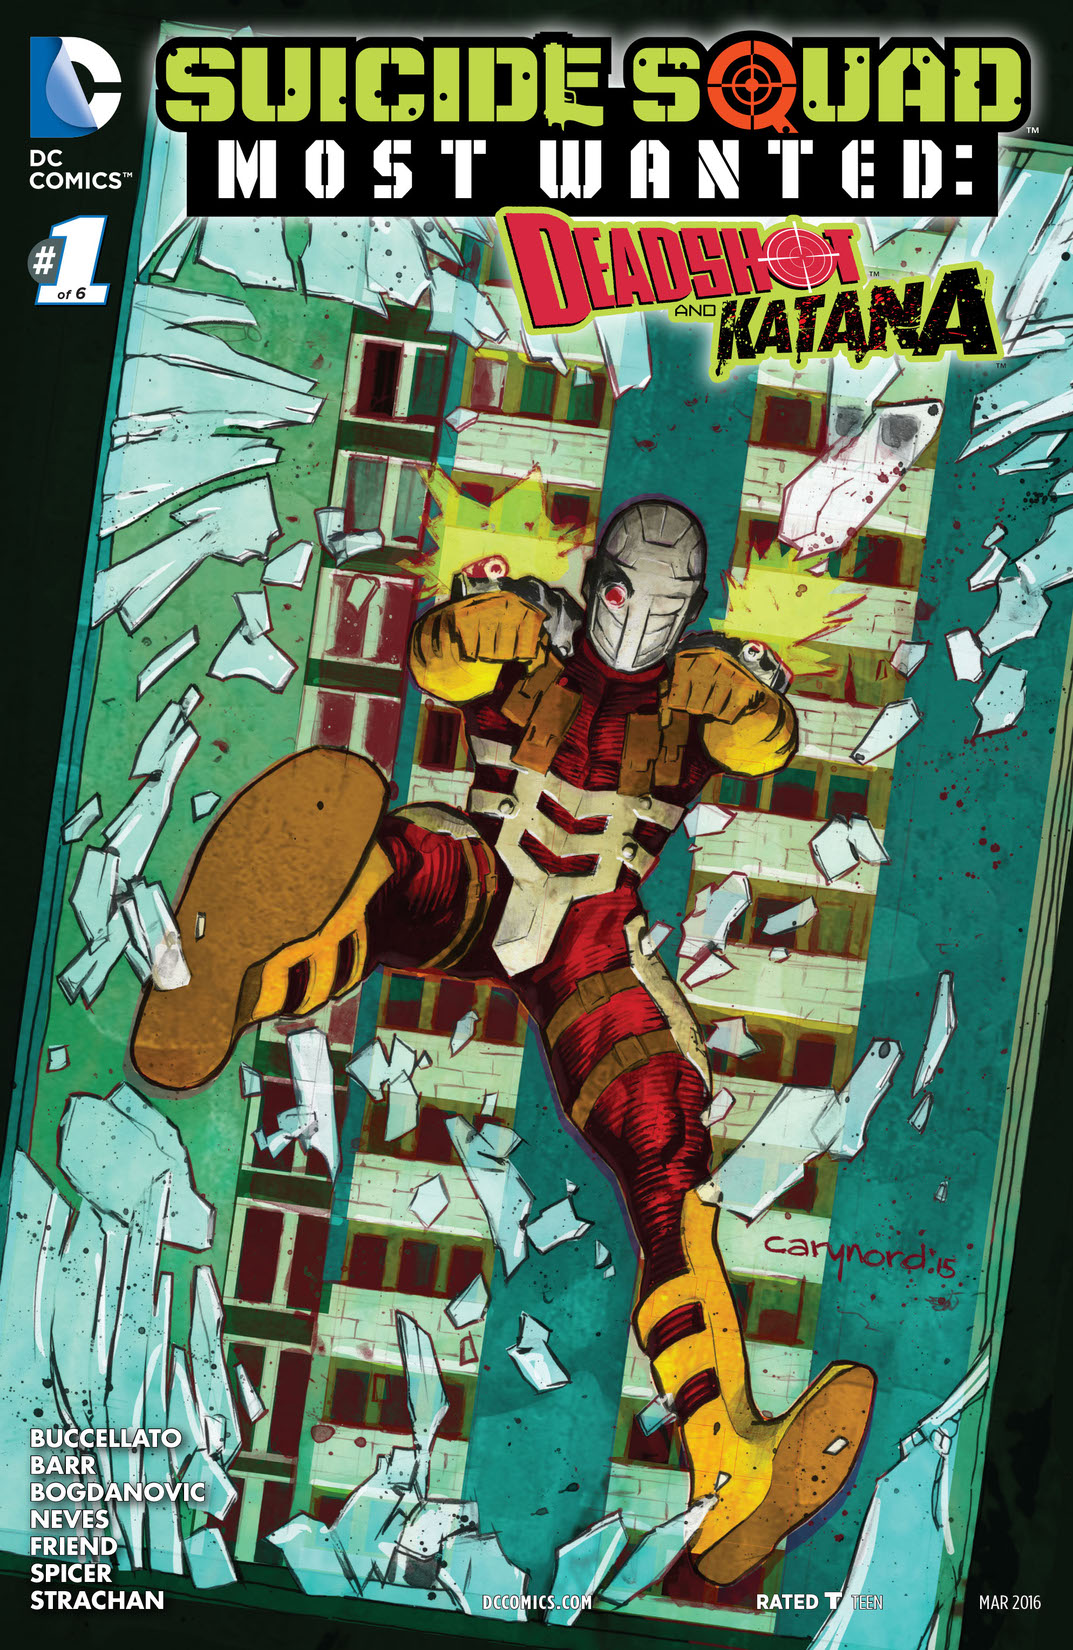 Suicide Squad Most Wanted: Deadshot and Katana #1 preview images